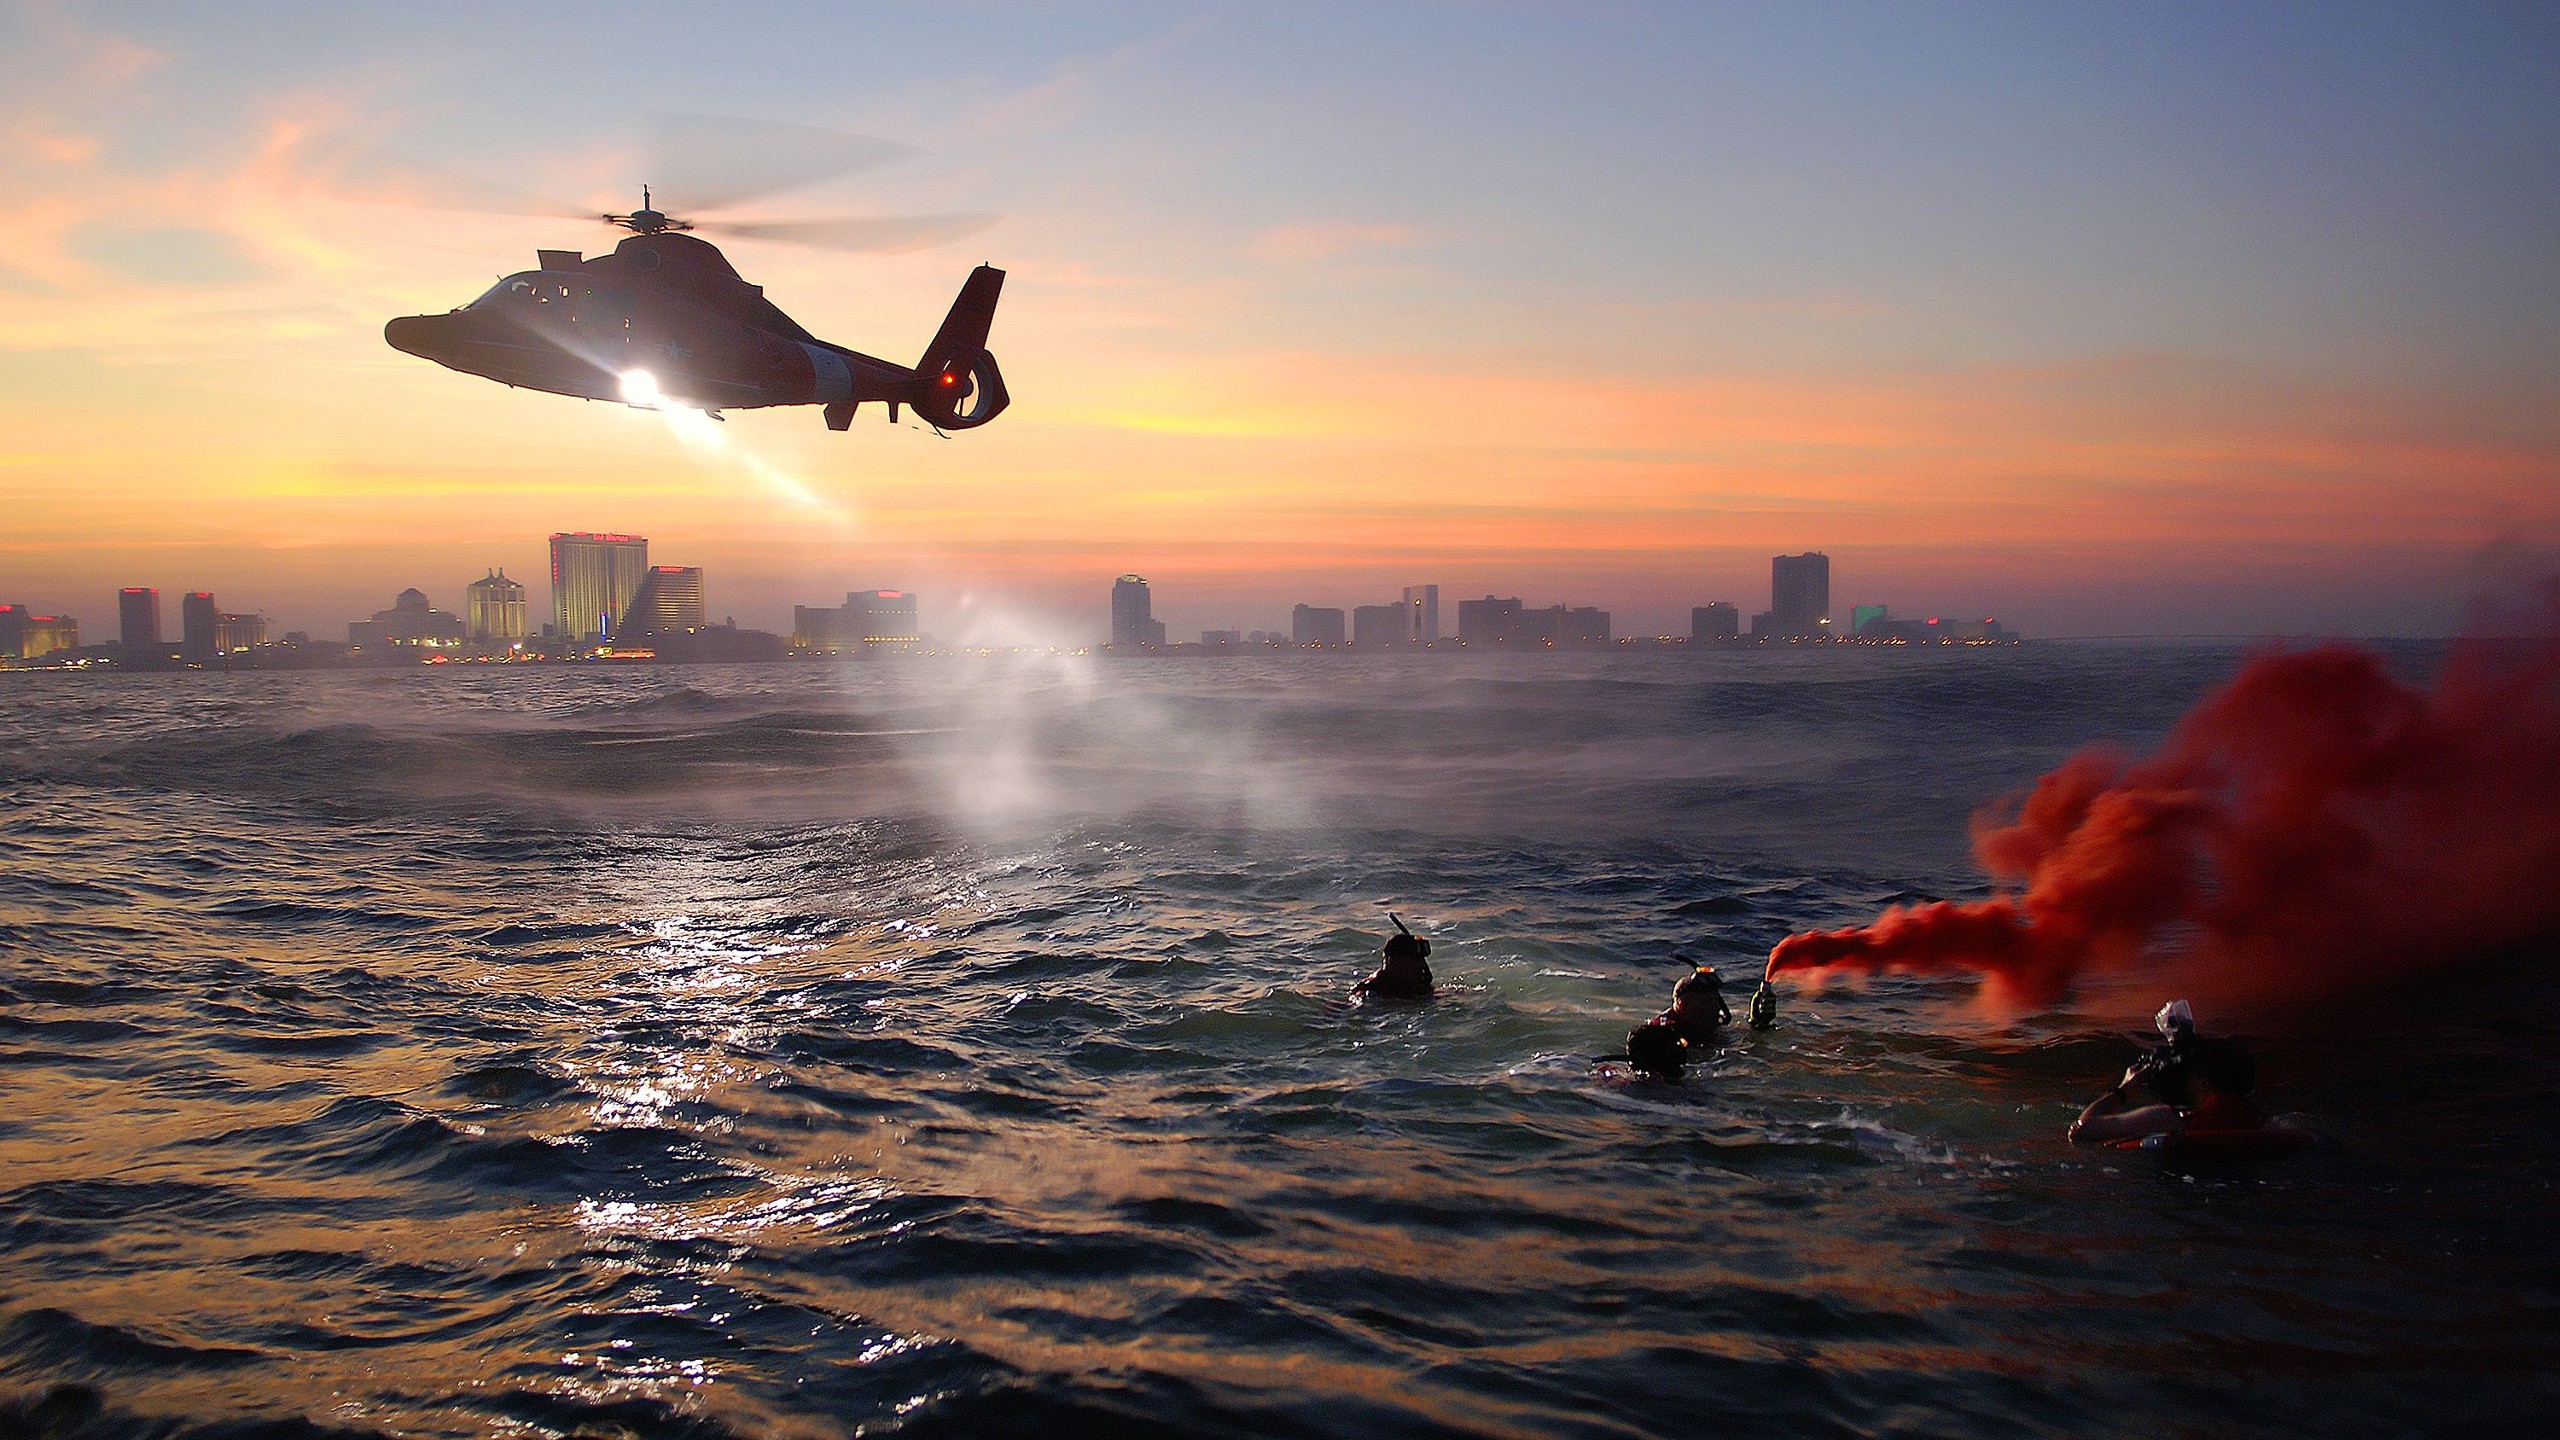 General 2560x1440 military helicopters military aircraft coast guard New York City aircraft sea United States Coast Guard colored smoke military training divers spotlights Rescue Team sunset dusk skyline